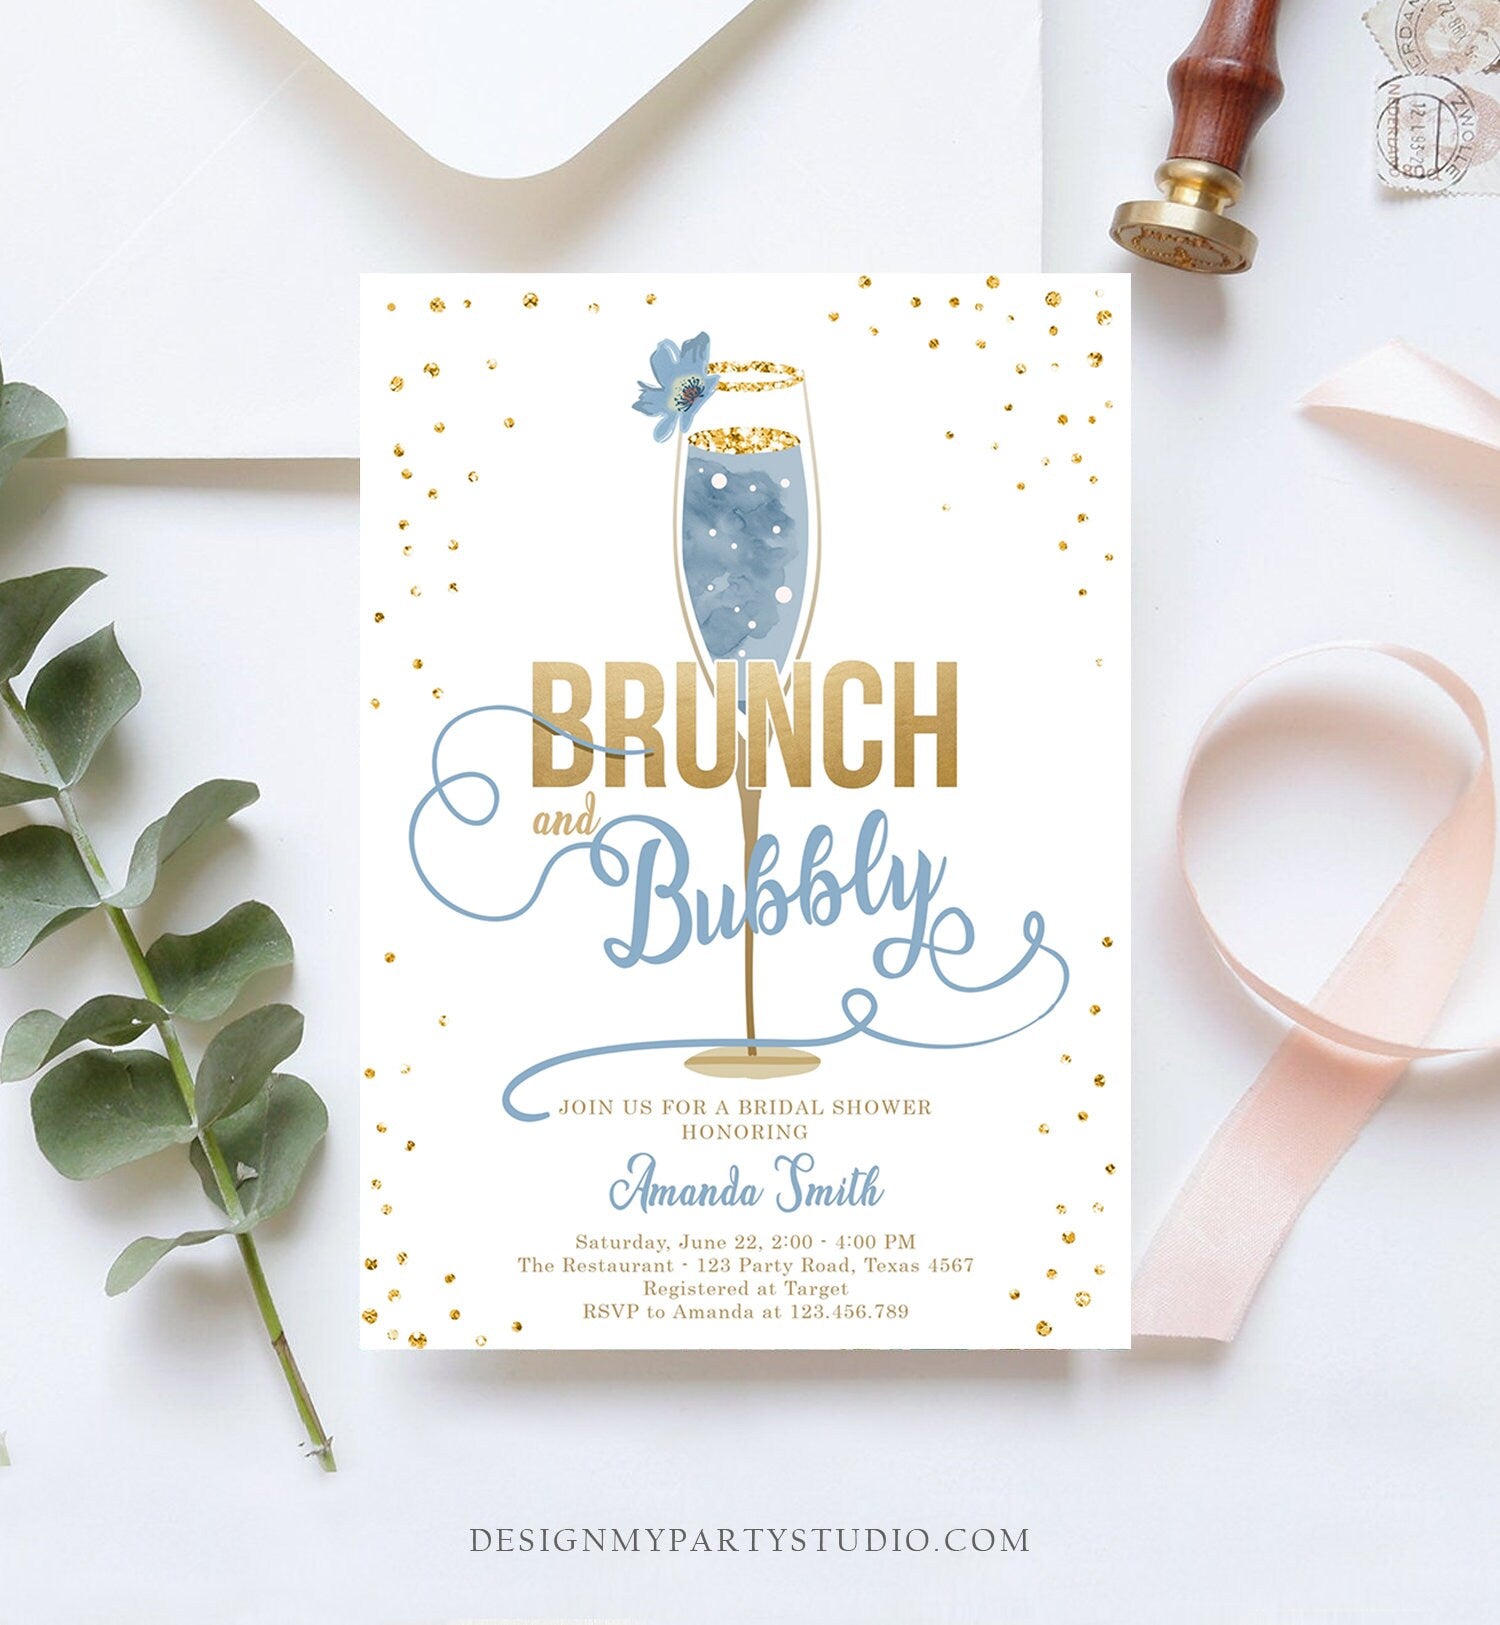 Editable Brunch and Bubbly Bridal Shower Invitation Floral Champagne Gold Dusty Blue Wedding Download Printable Template Digital Corjl 0150